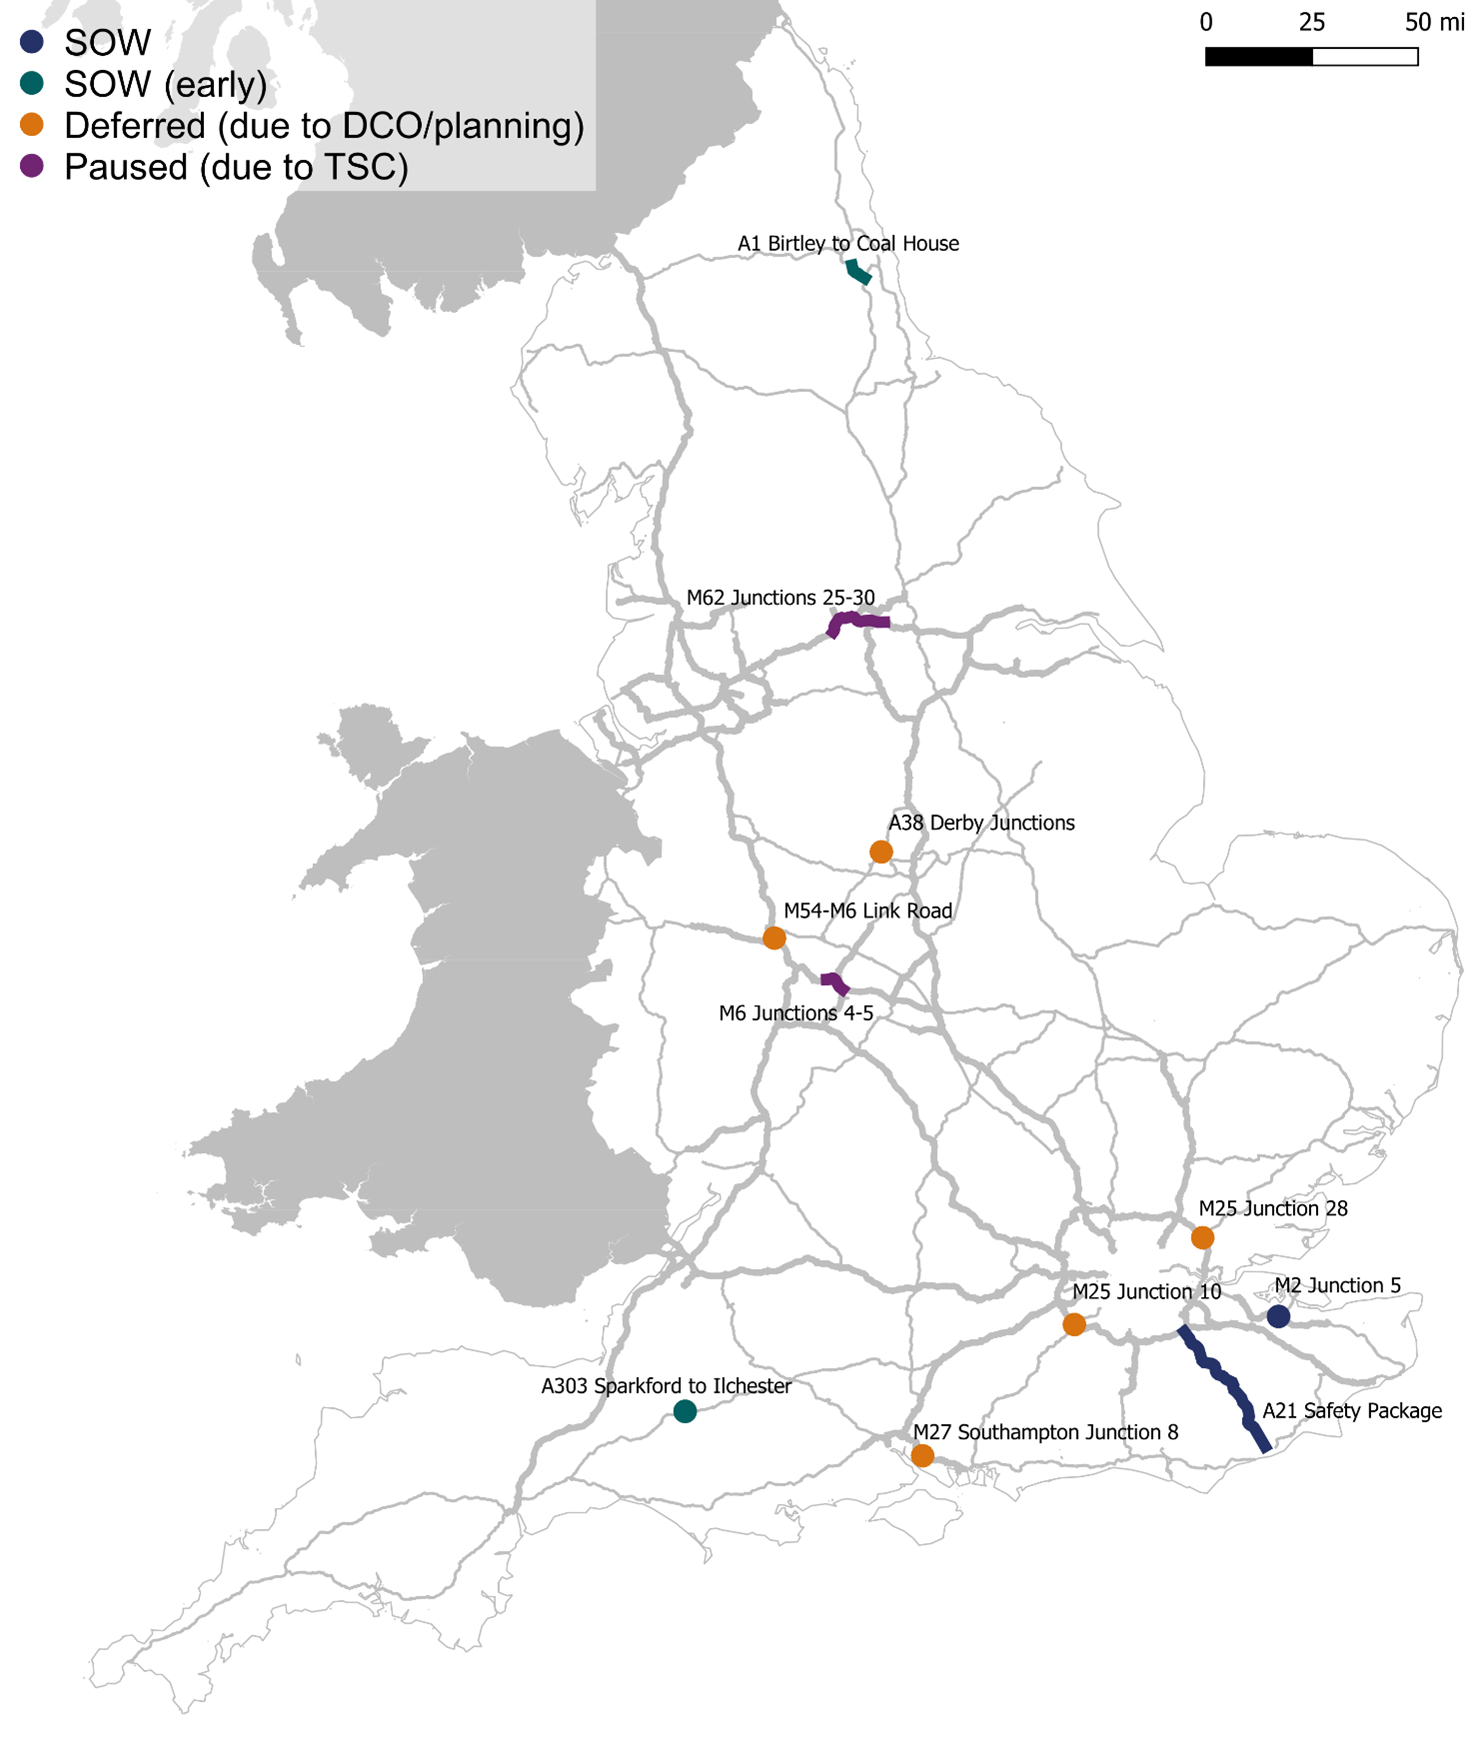 This map shows schemes and their status: A1 Birtley to Coal House SOW early; M62 Junctions 25 to 30 Paused (due to TSC); A38 Derby Junctions Deferred (due to DCO/planning); M54-M6 Link Road Deferred (due to DCO/Planning); M6 Junctions 4 to 5 Paused (due to TSC); M25 Junction 28 Deferred (due to DCO/Planning); M25 Junction 10 Deferred (due to DCO/planning); M2 Junction 5 SOW; A21 Safety Package SOW; M27 Southampton Junction 8 Deferred (due to DCO/planning); A303 Sparkford to Ilchester SOW (early)